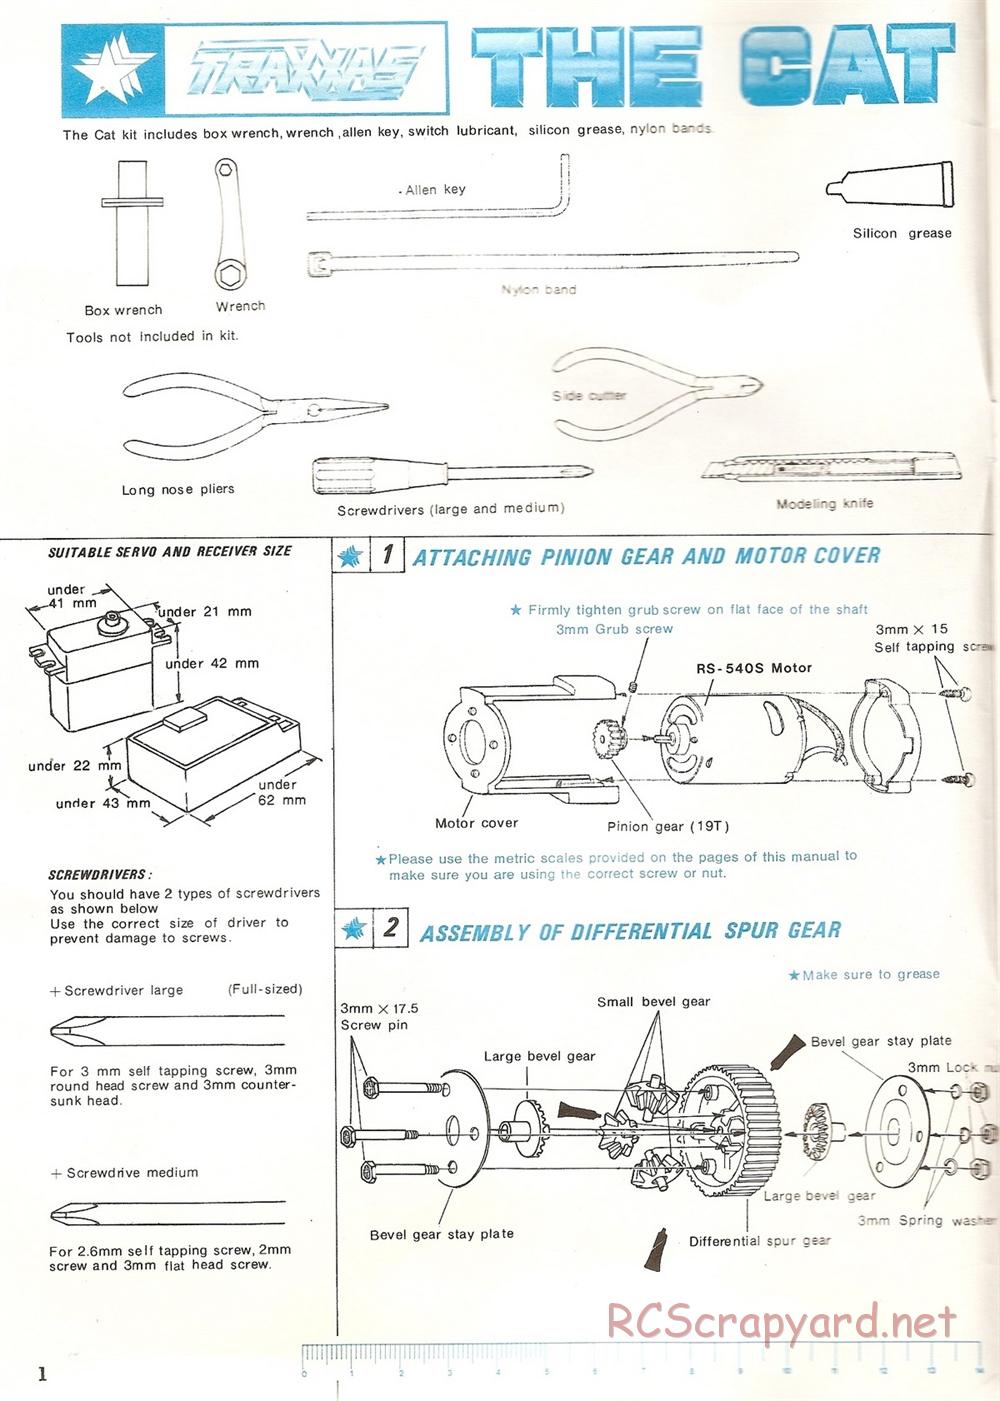 Traxxas - The Cat (1987) - Manual - Page 2